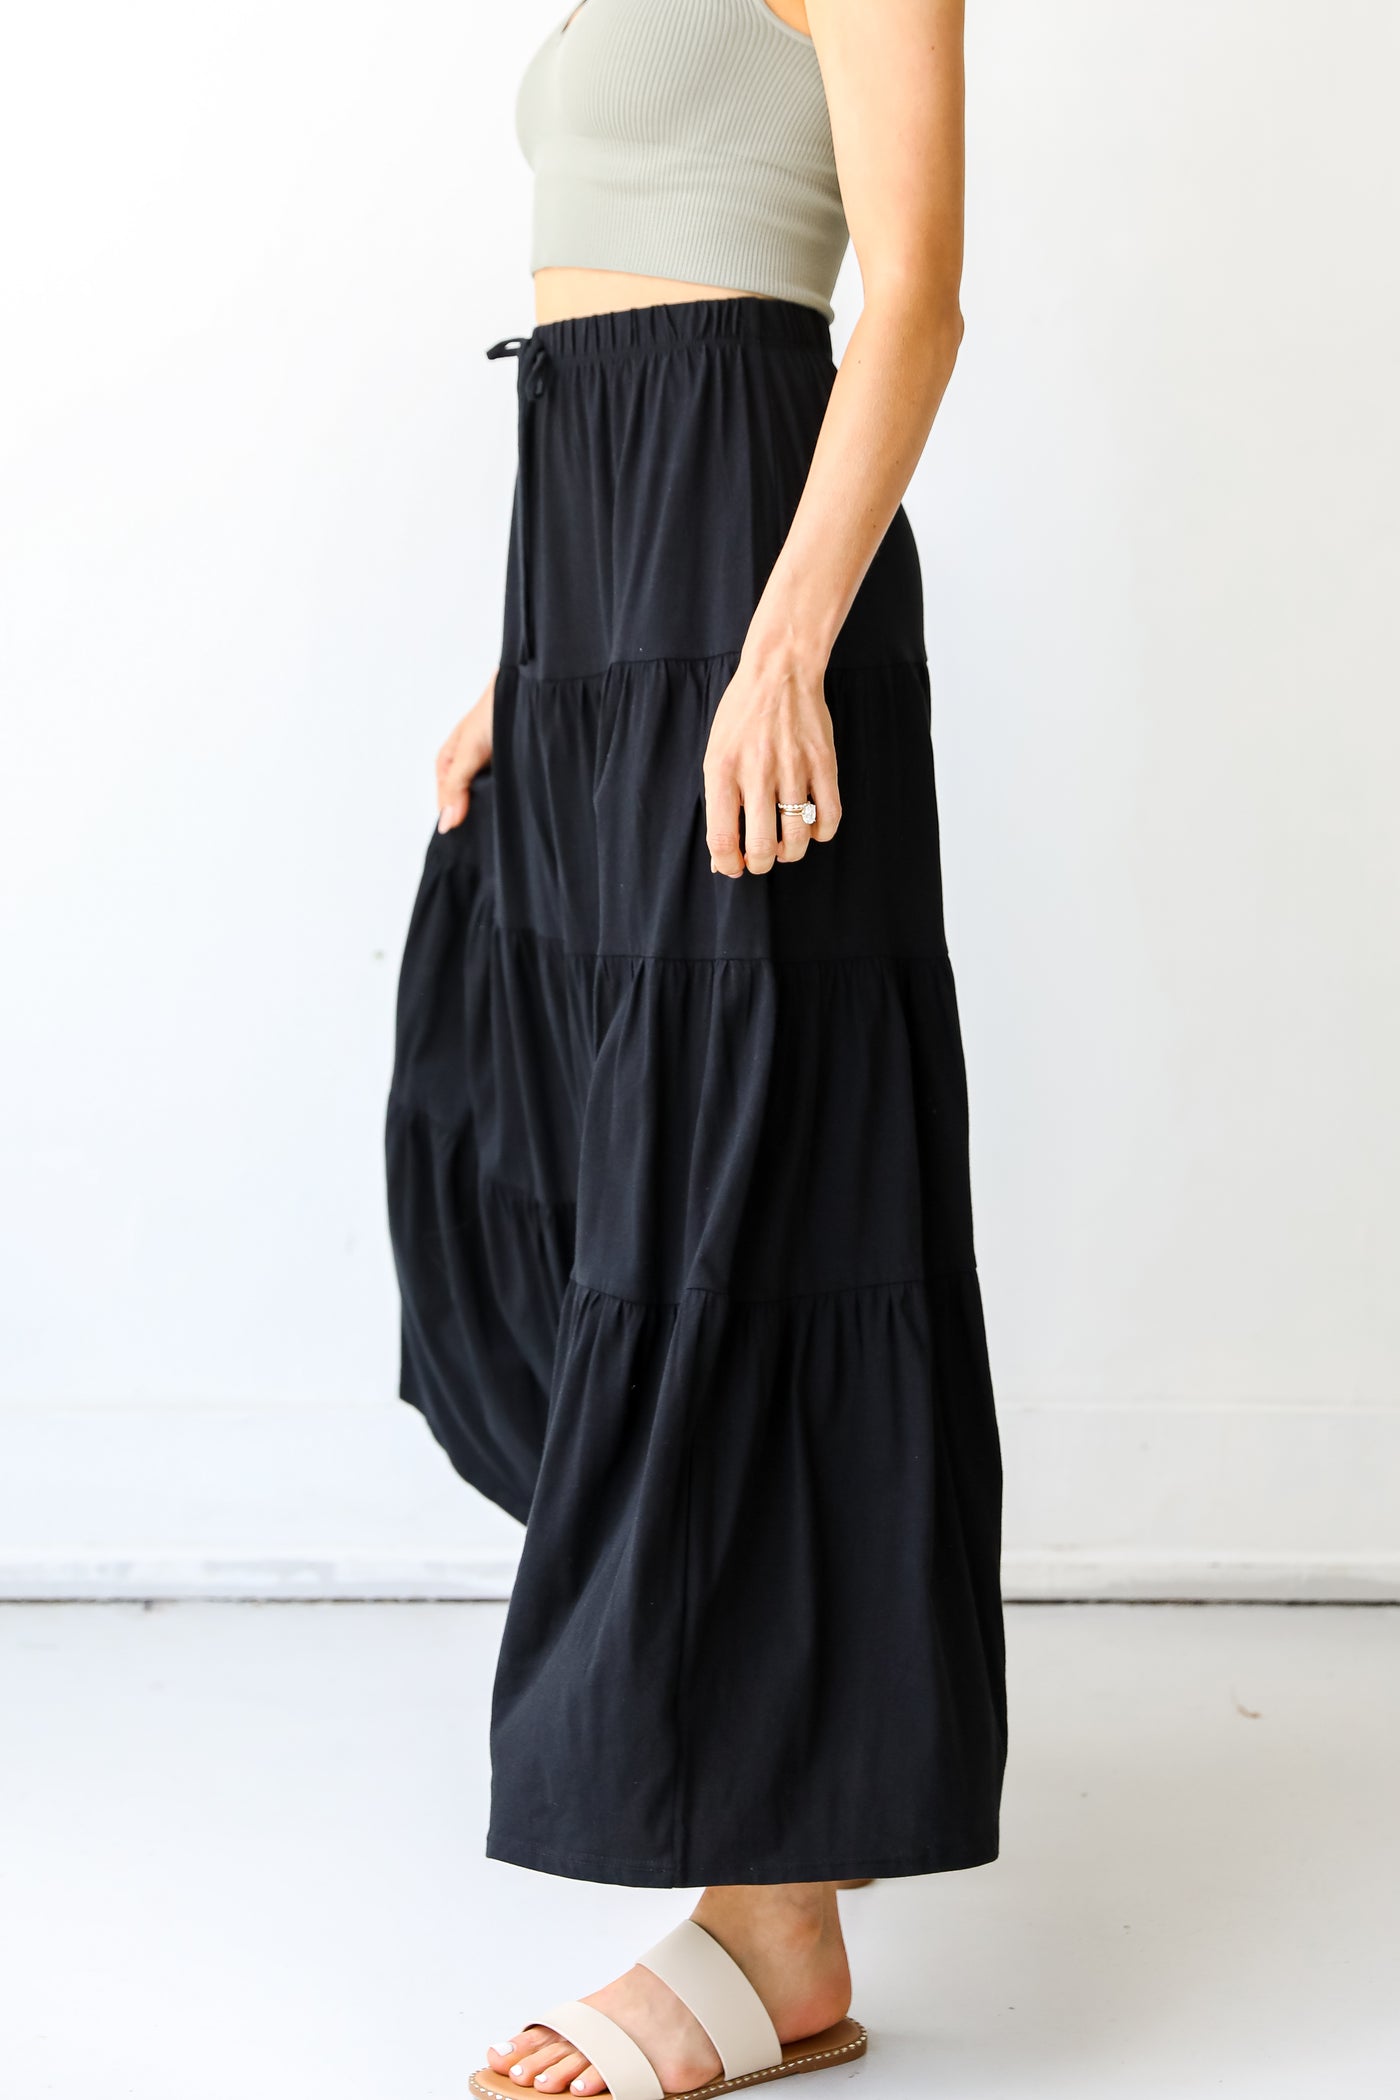 Tiered Maxi Skirt in black side view